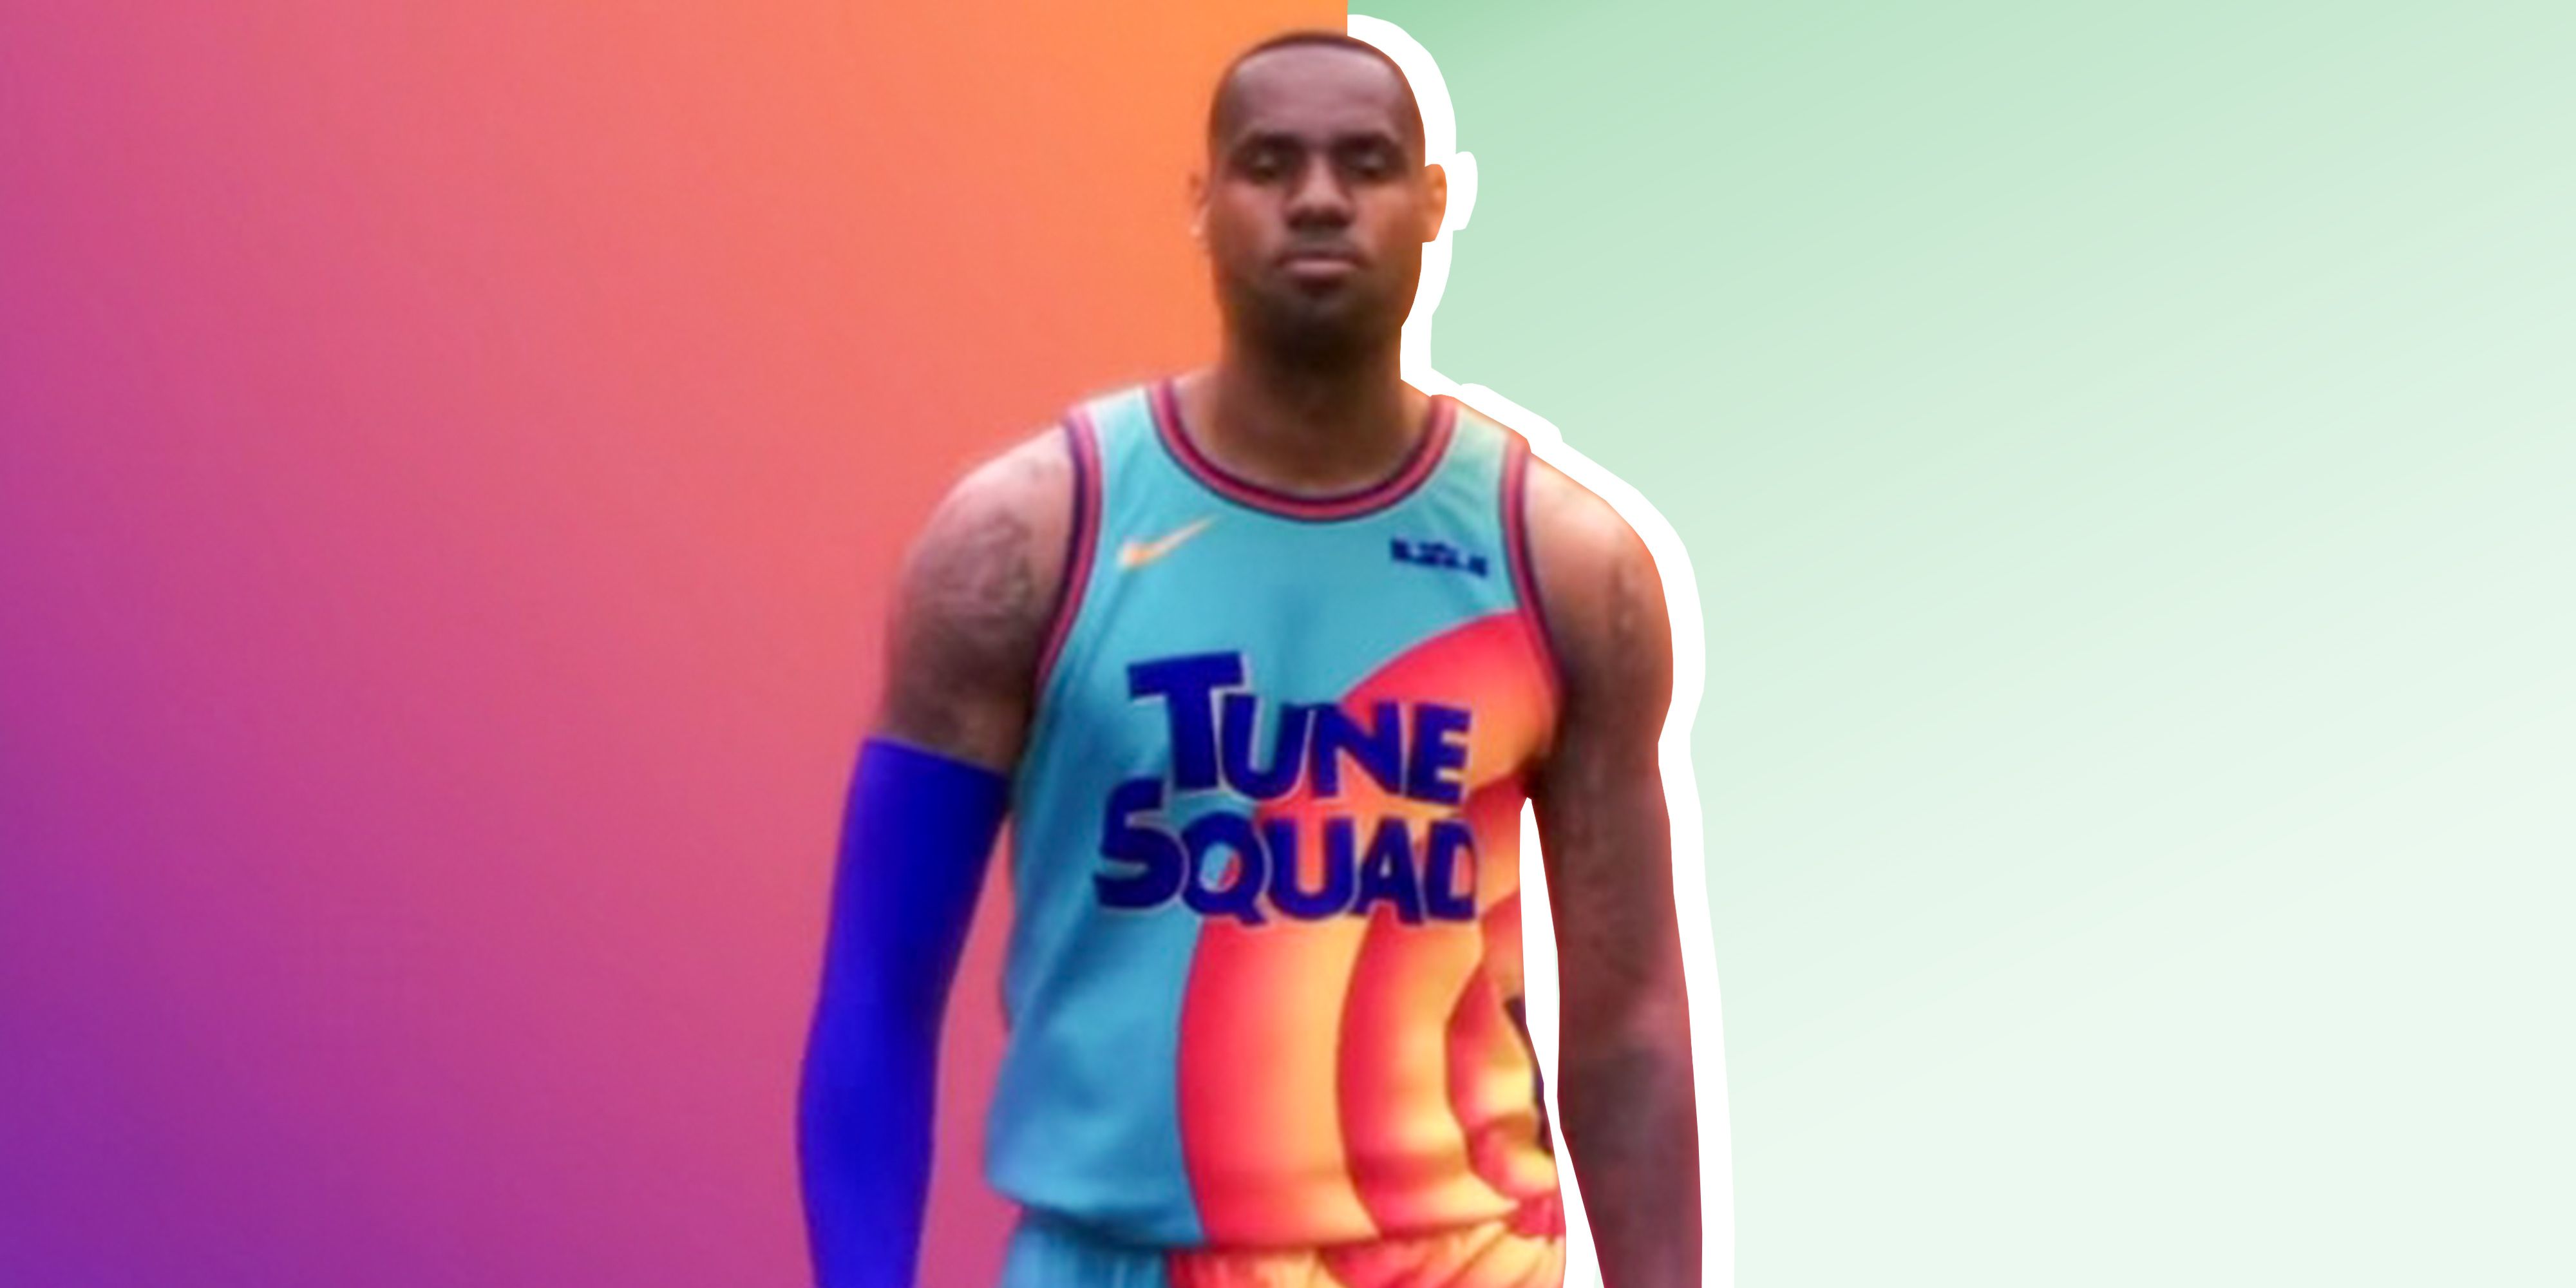 rijst datum Penelope Space Jam: A New Legacy Tune Squad Jersey Meaning - Space Jam 2 Details  Number 6